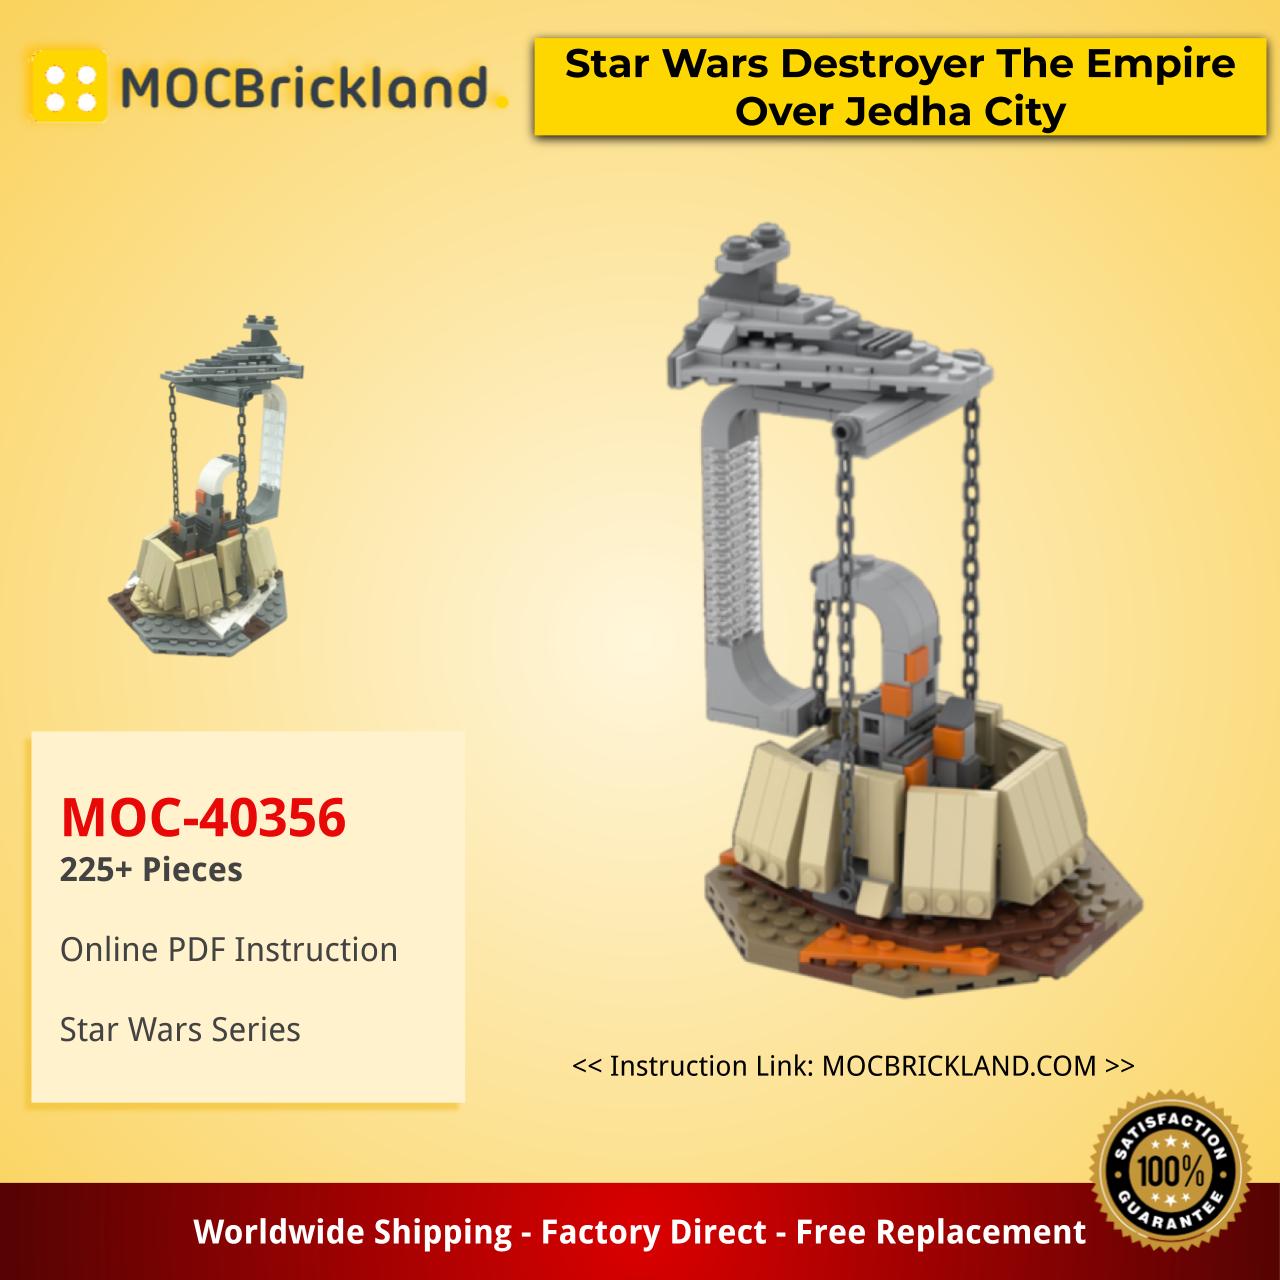 MOCBRICKLAND MOC-40356 Tensegrity Sculpture Star Wars Destroyer The Empire Over Jedha City